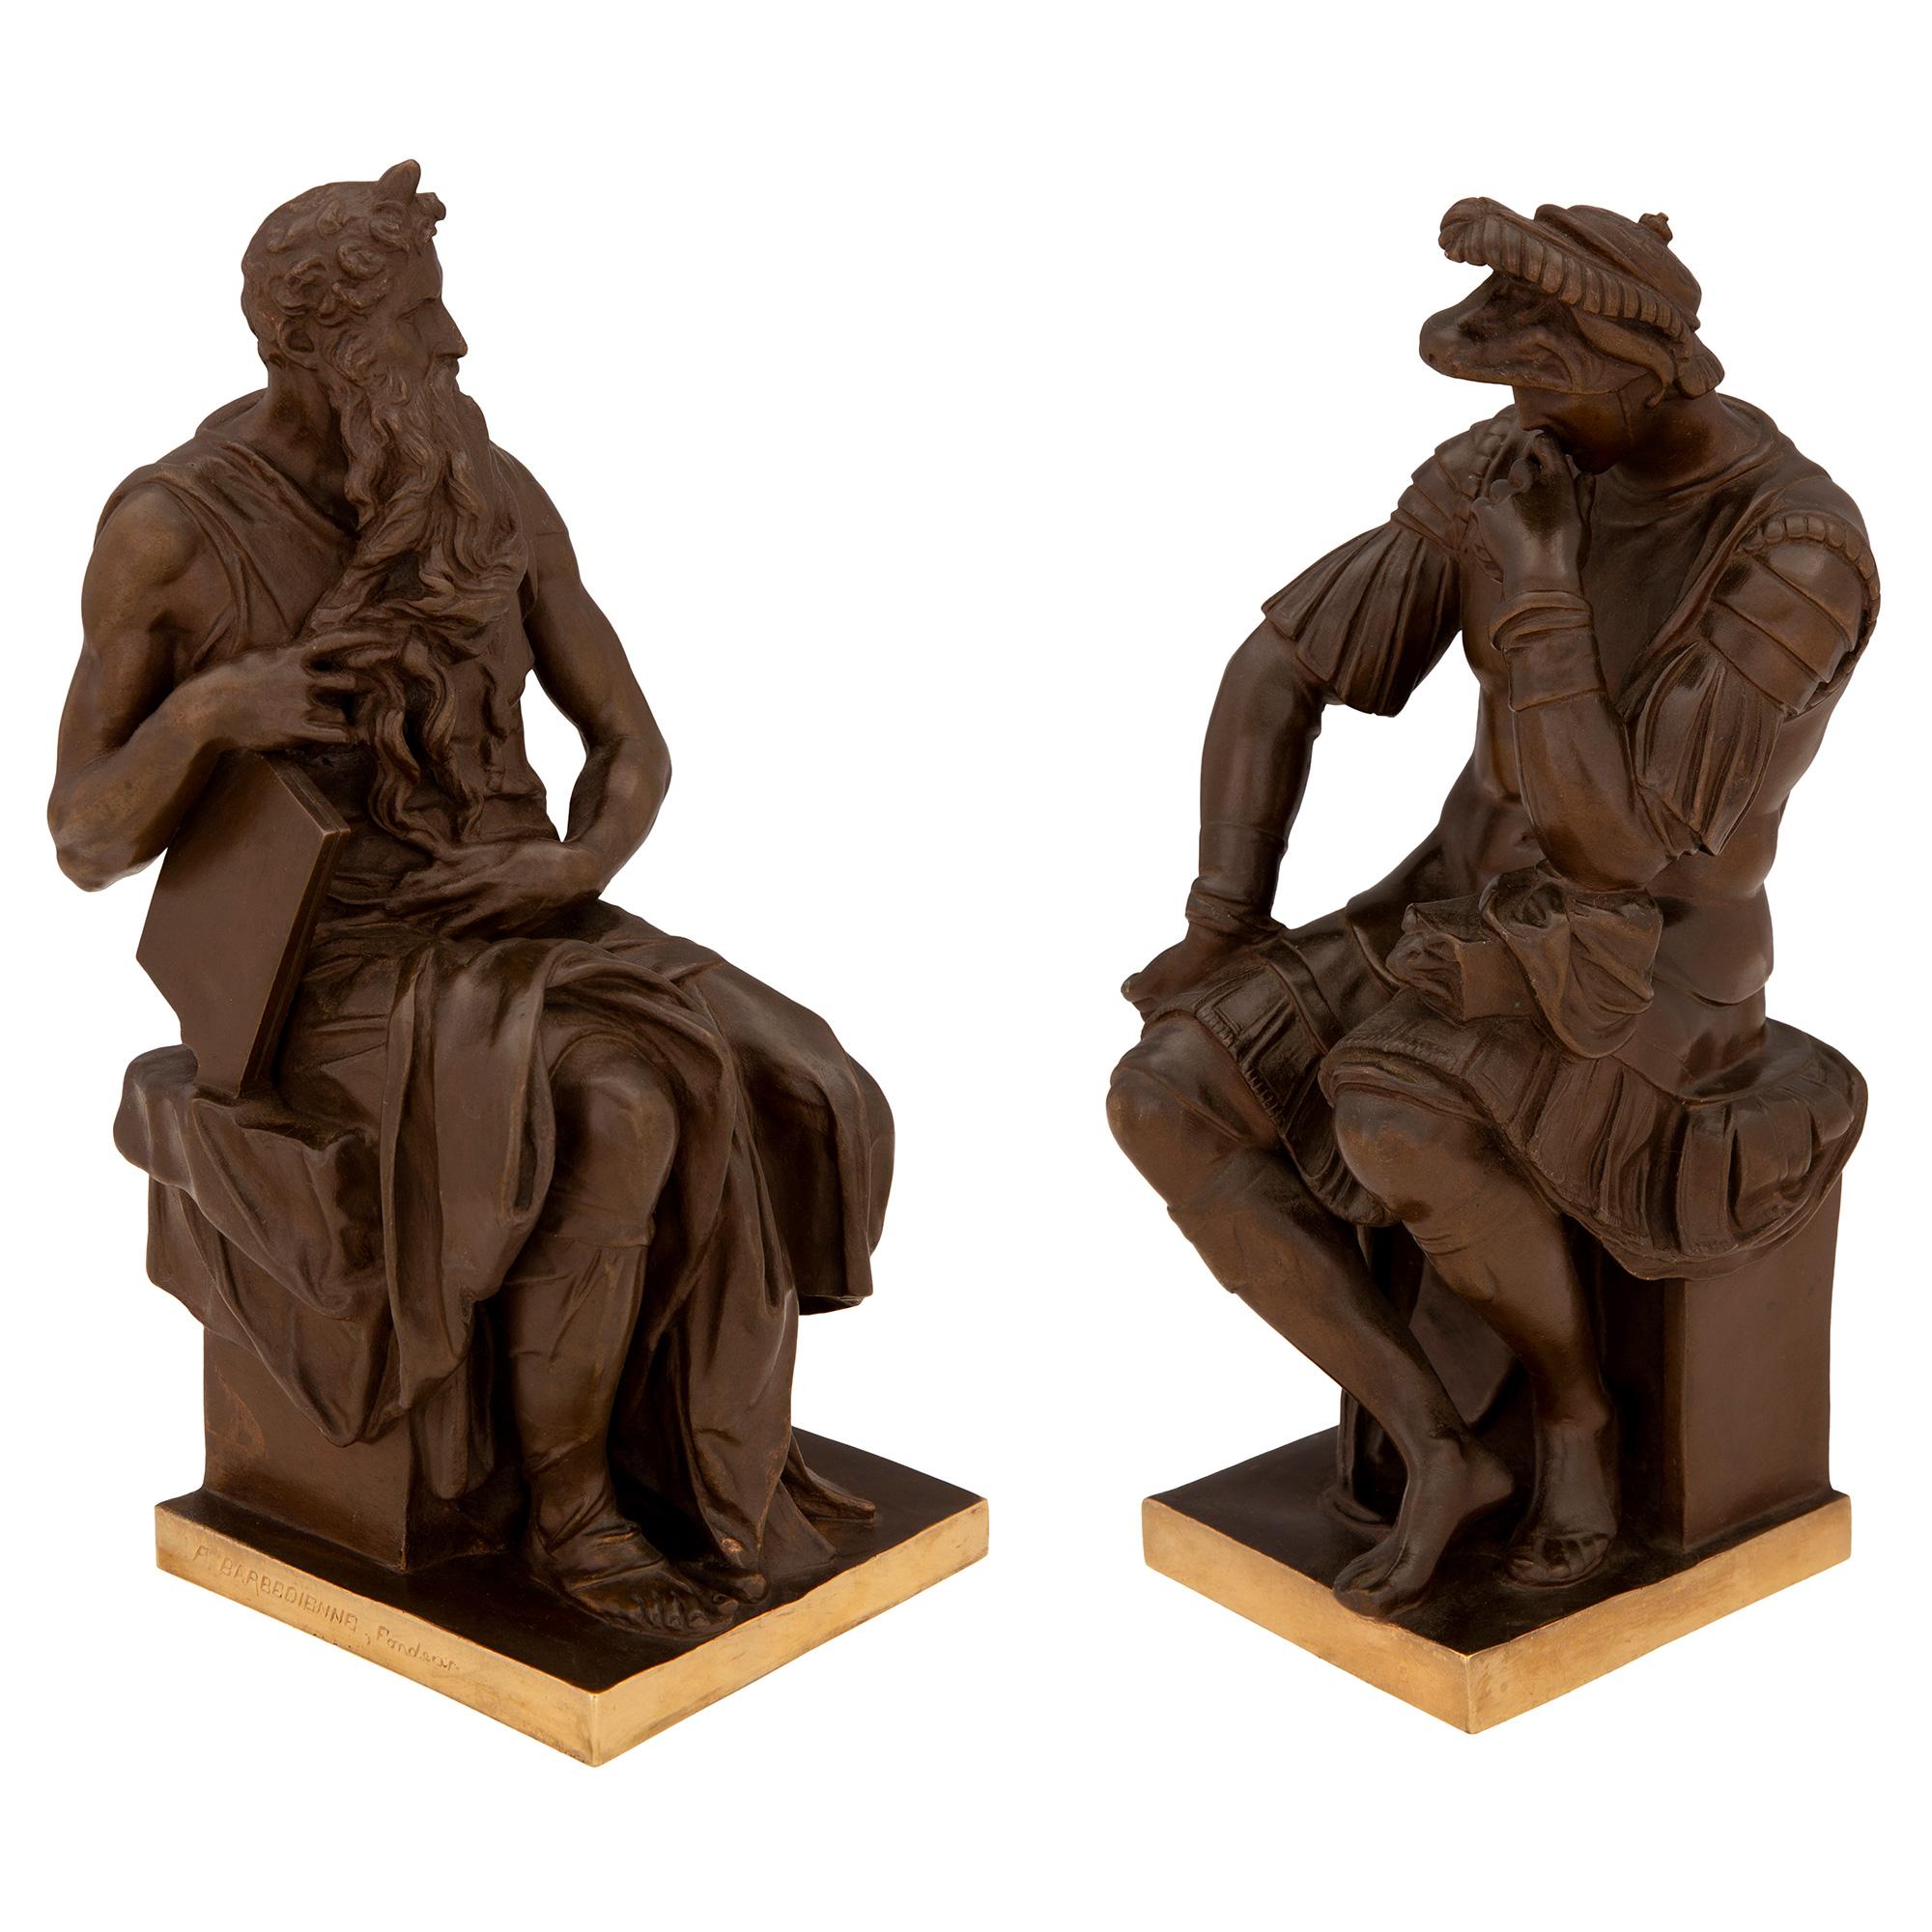 An impressive and high quality true pair of French 19th century Neo-Classical st. patinated bronze and ormolu statues of Moses and the Seated Thinker, signed F. Barbedienne, Fondeur. Each statue is raised by an elegant square ormolu base where the